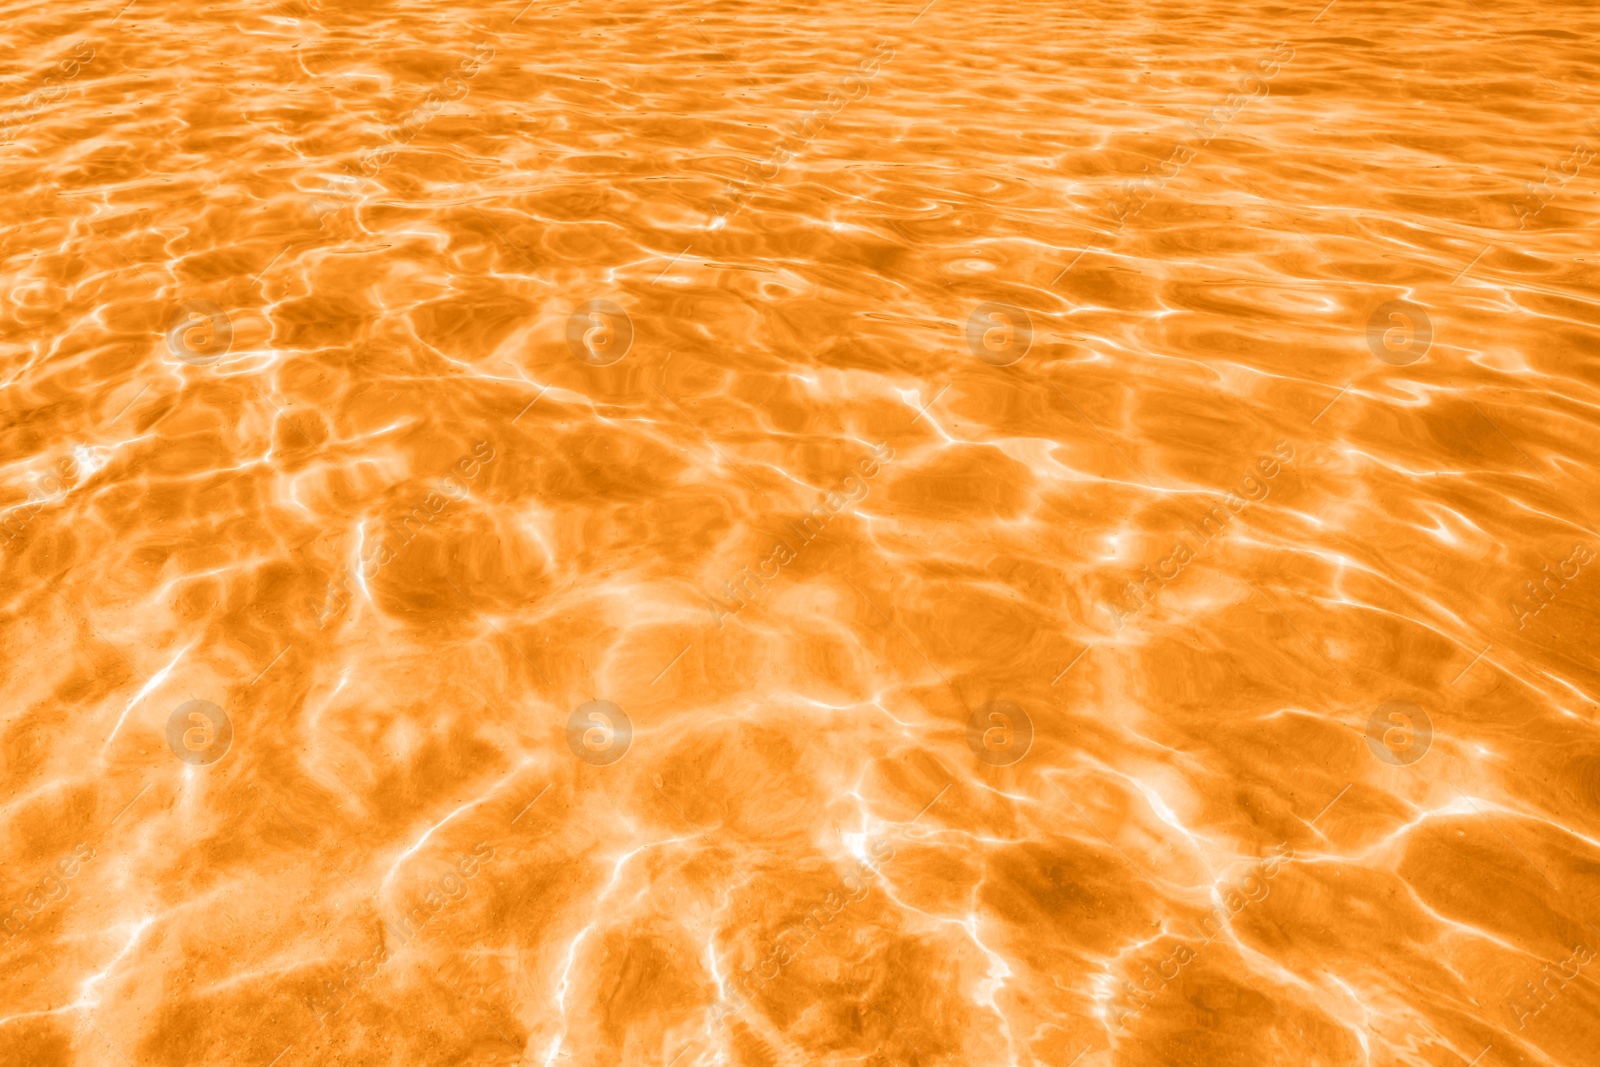 Image of View on ocean water with ripples and flecks. Toned in orange